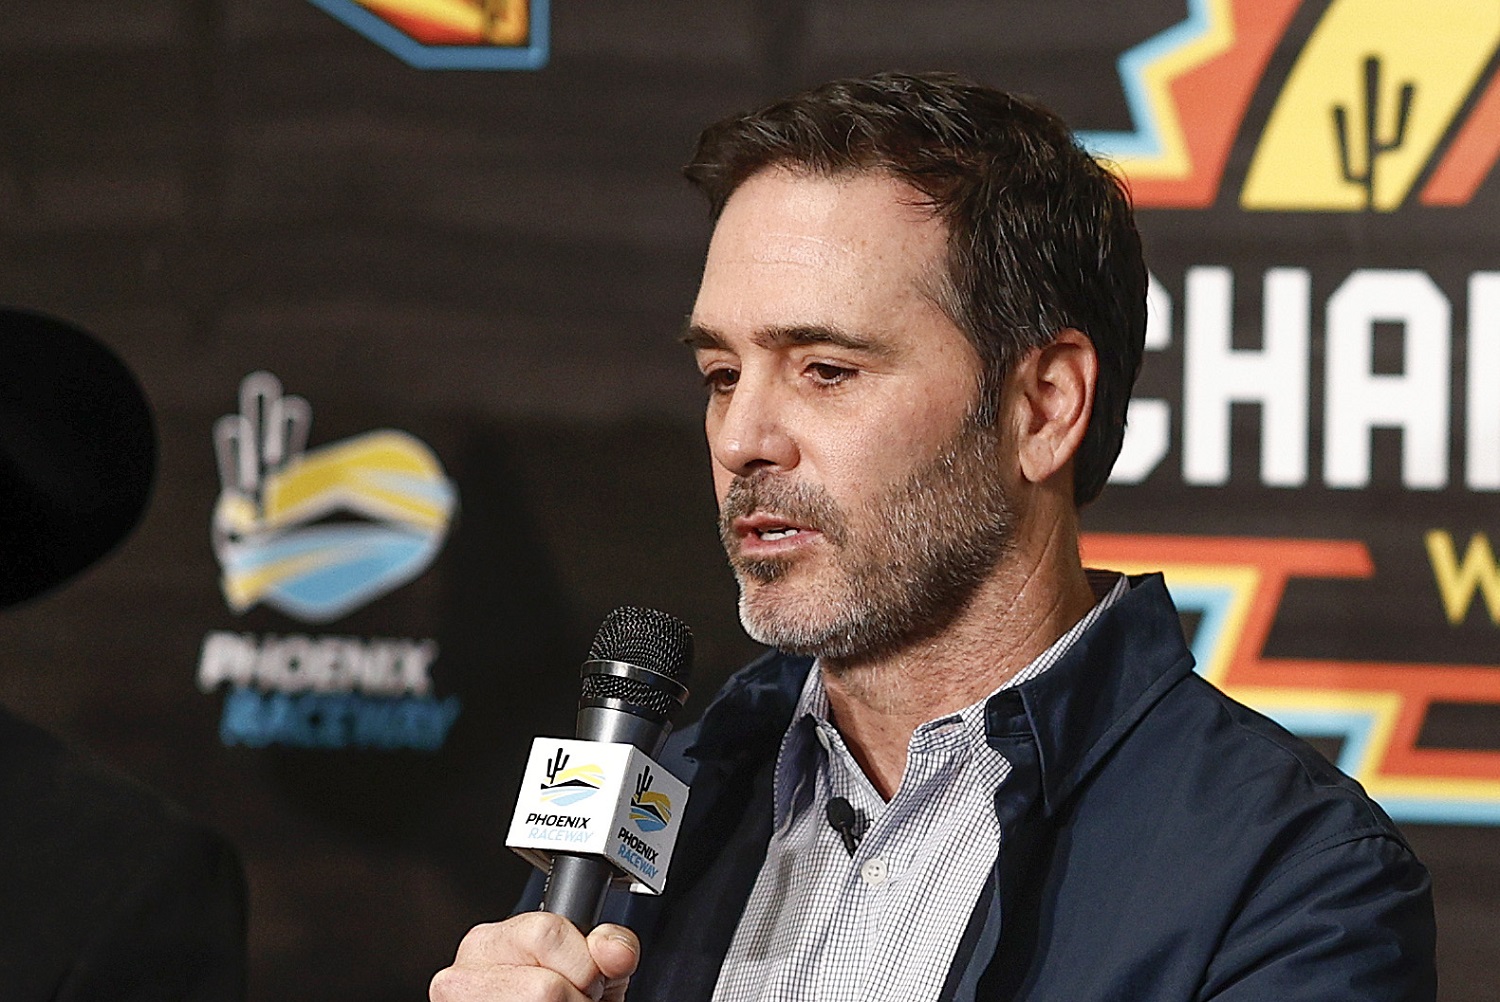 Jimmie Johnson announcing he has invested in Petty GMS Motorsports on Nov. 4, 2022 in Avondale, Arizona. | Chris Graythen/Getty Images